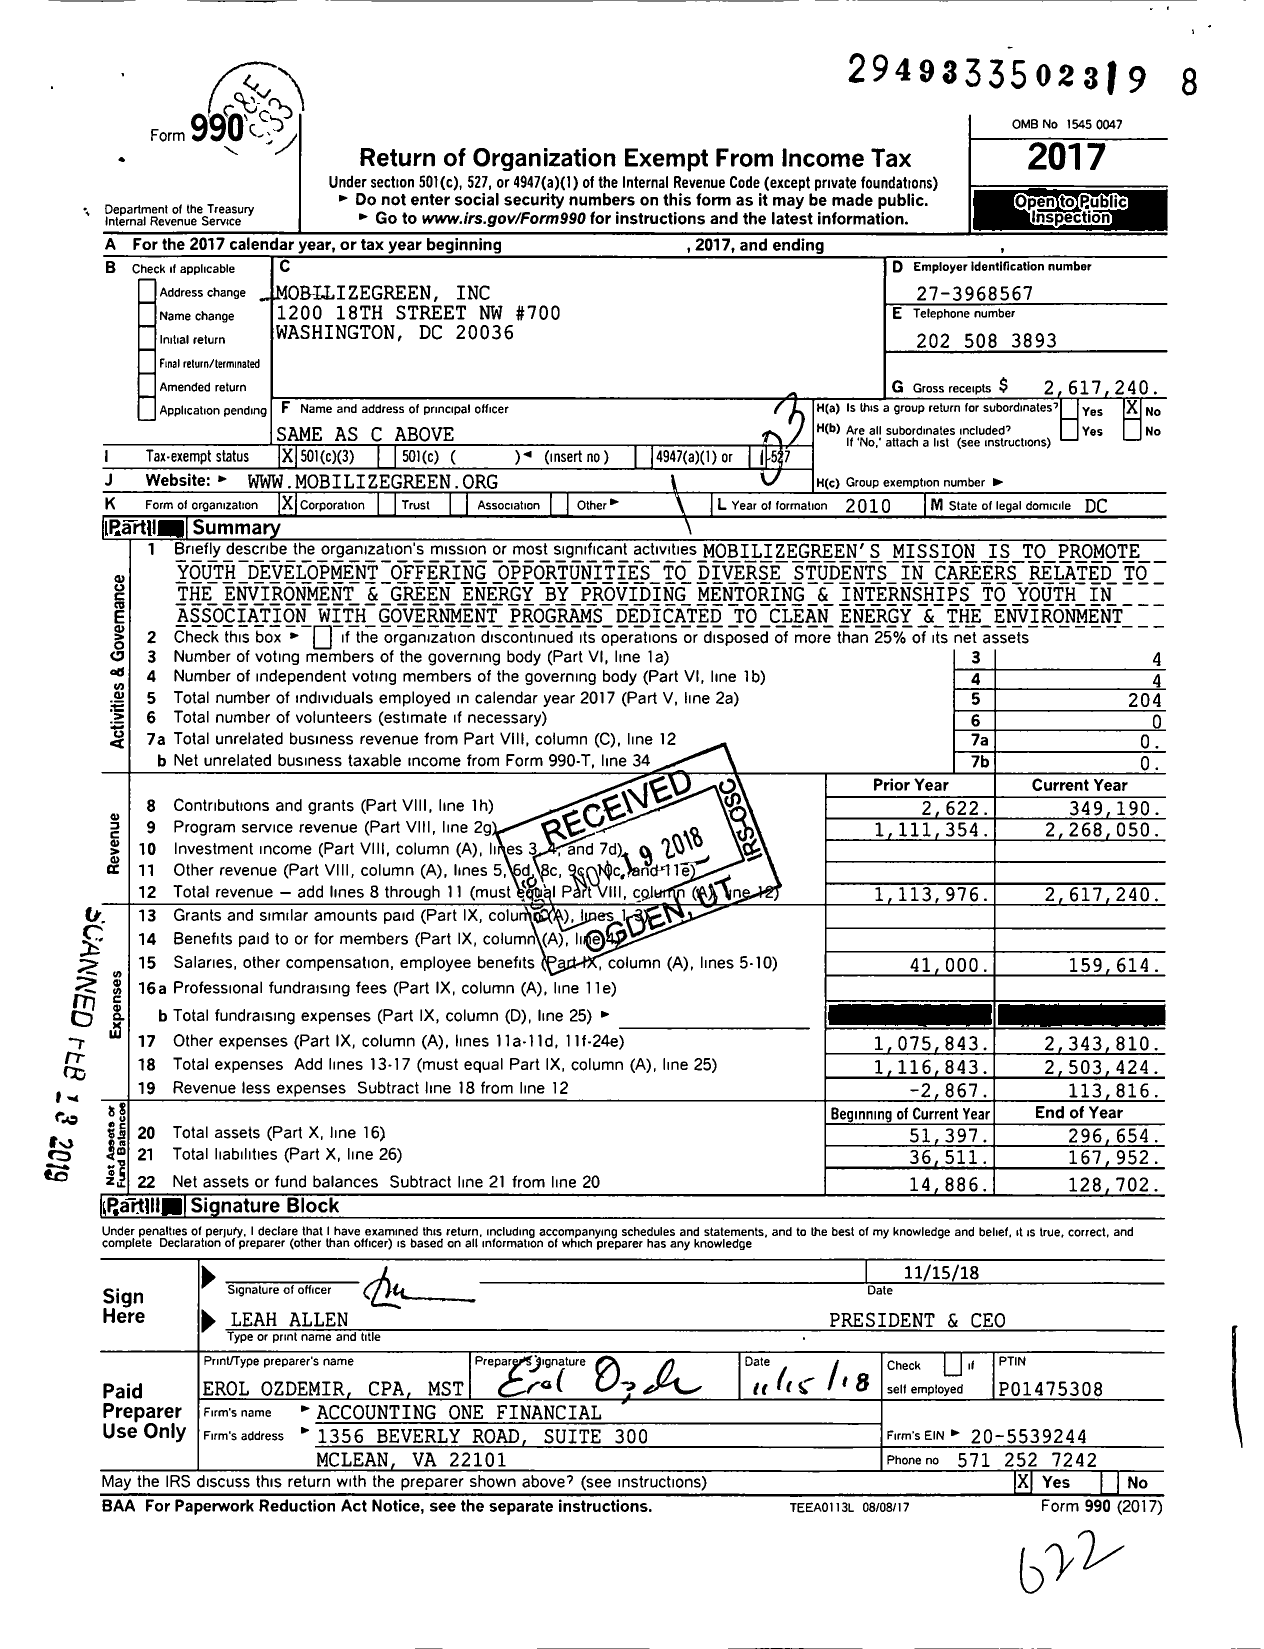 Image of first page of 2017 Form 990 for MobilizeGreen